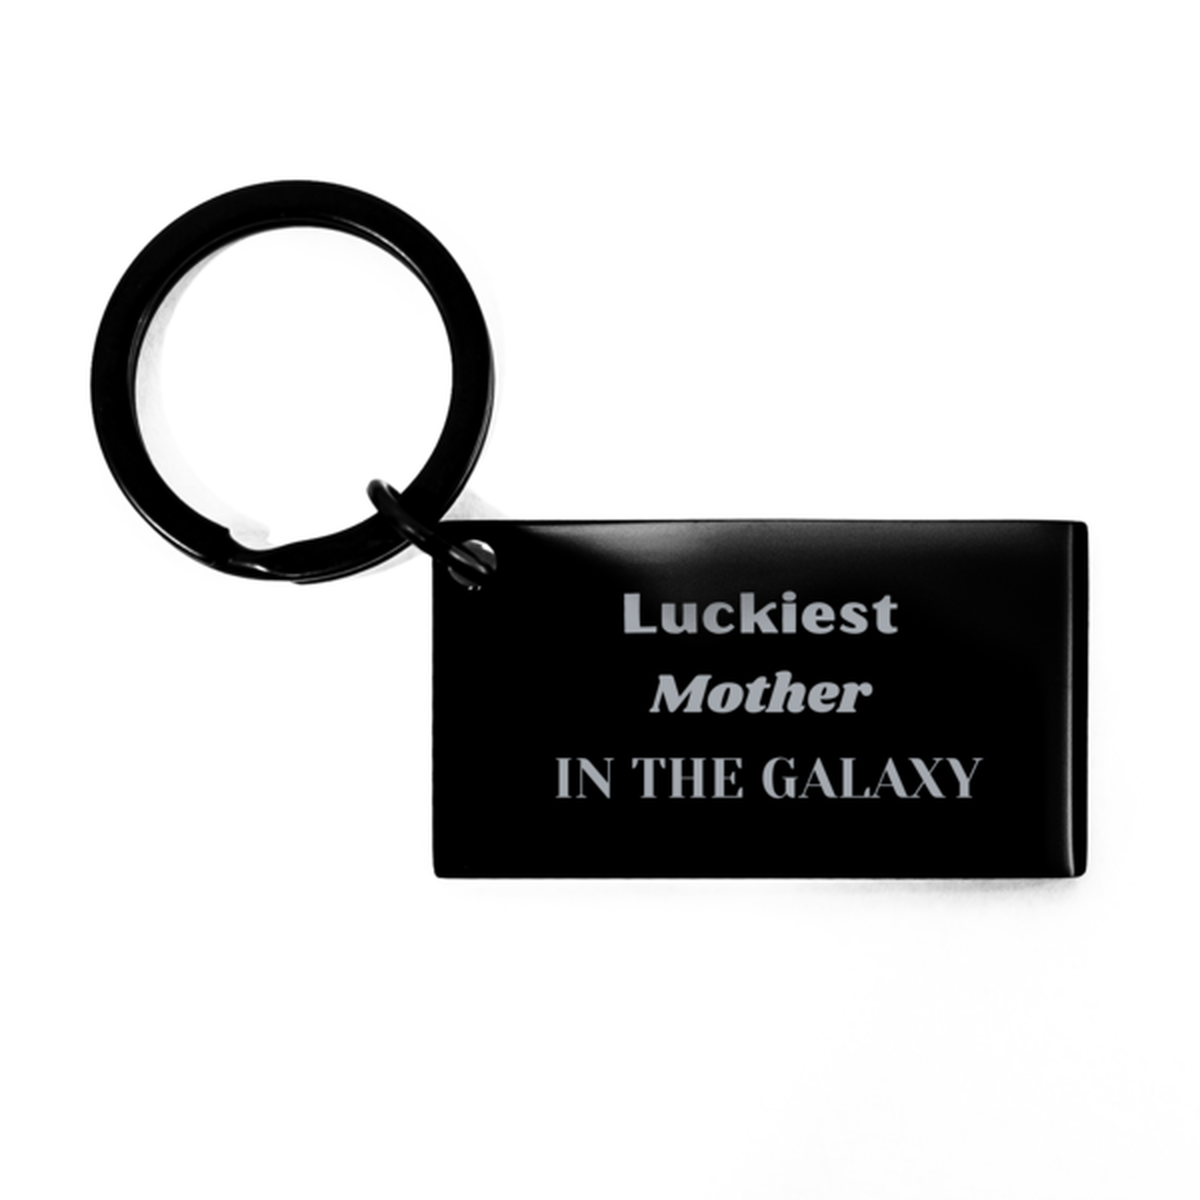 Luckiest Mother in the Galaxy, To My Mother Engraved Gifts, Christmas Mother Keychain Gifts, X-mas Birthday Unique Gifts For Mother Men Women